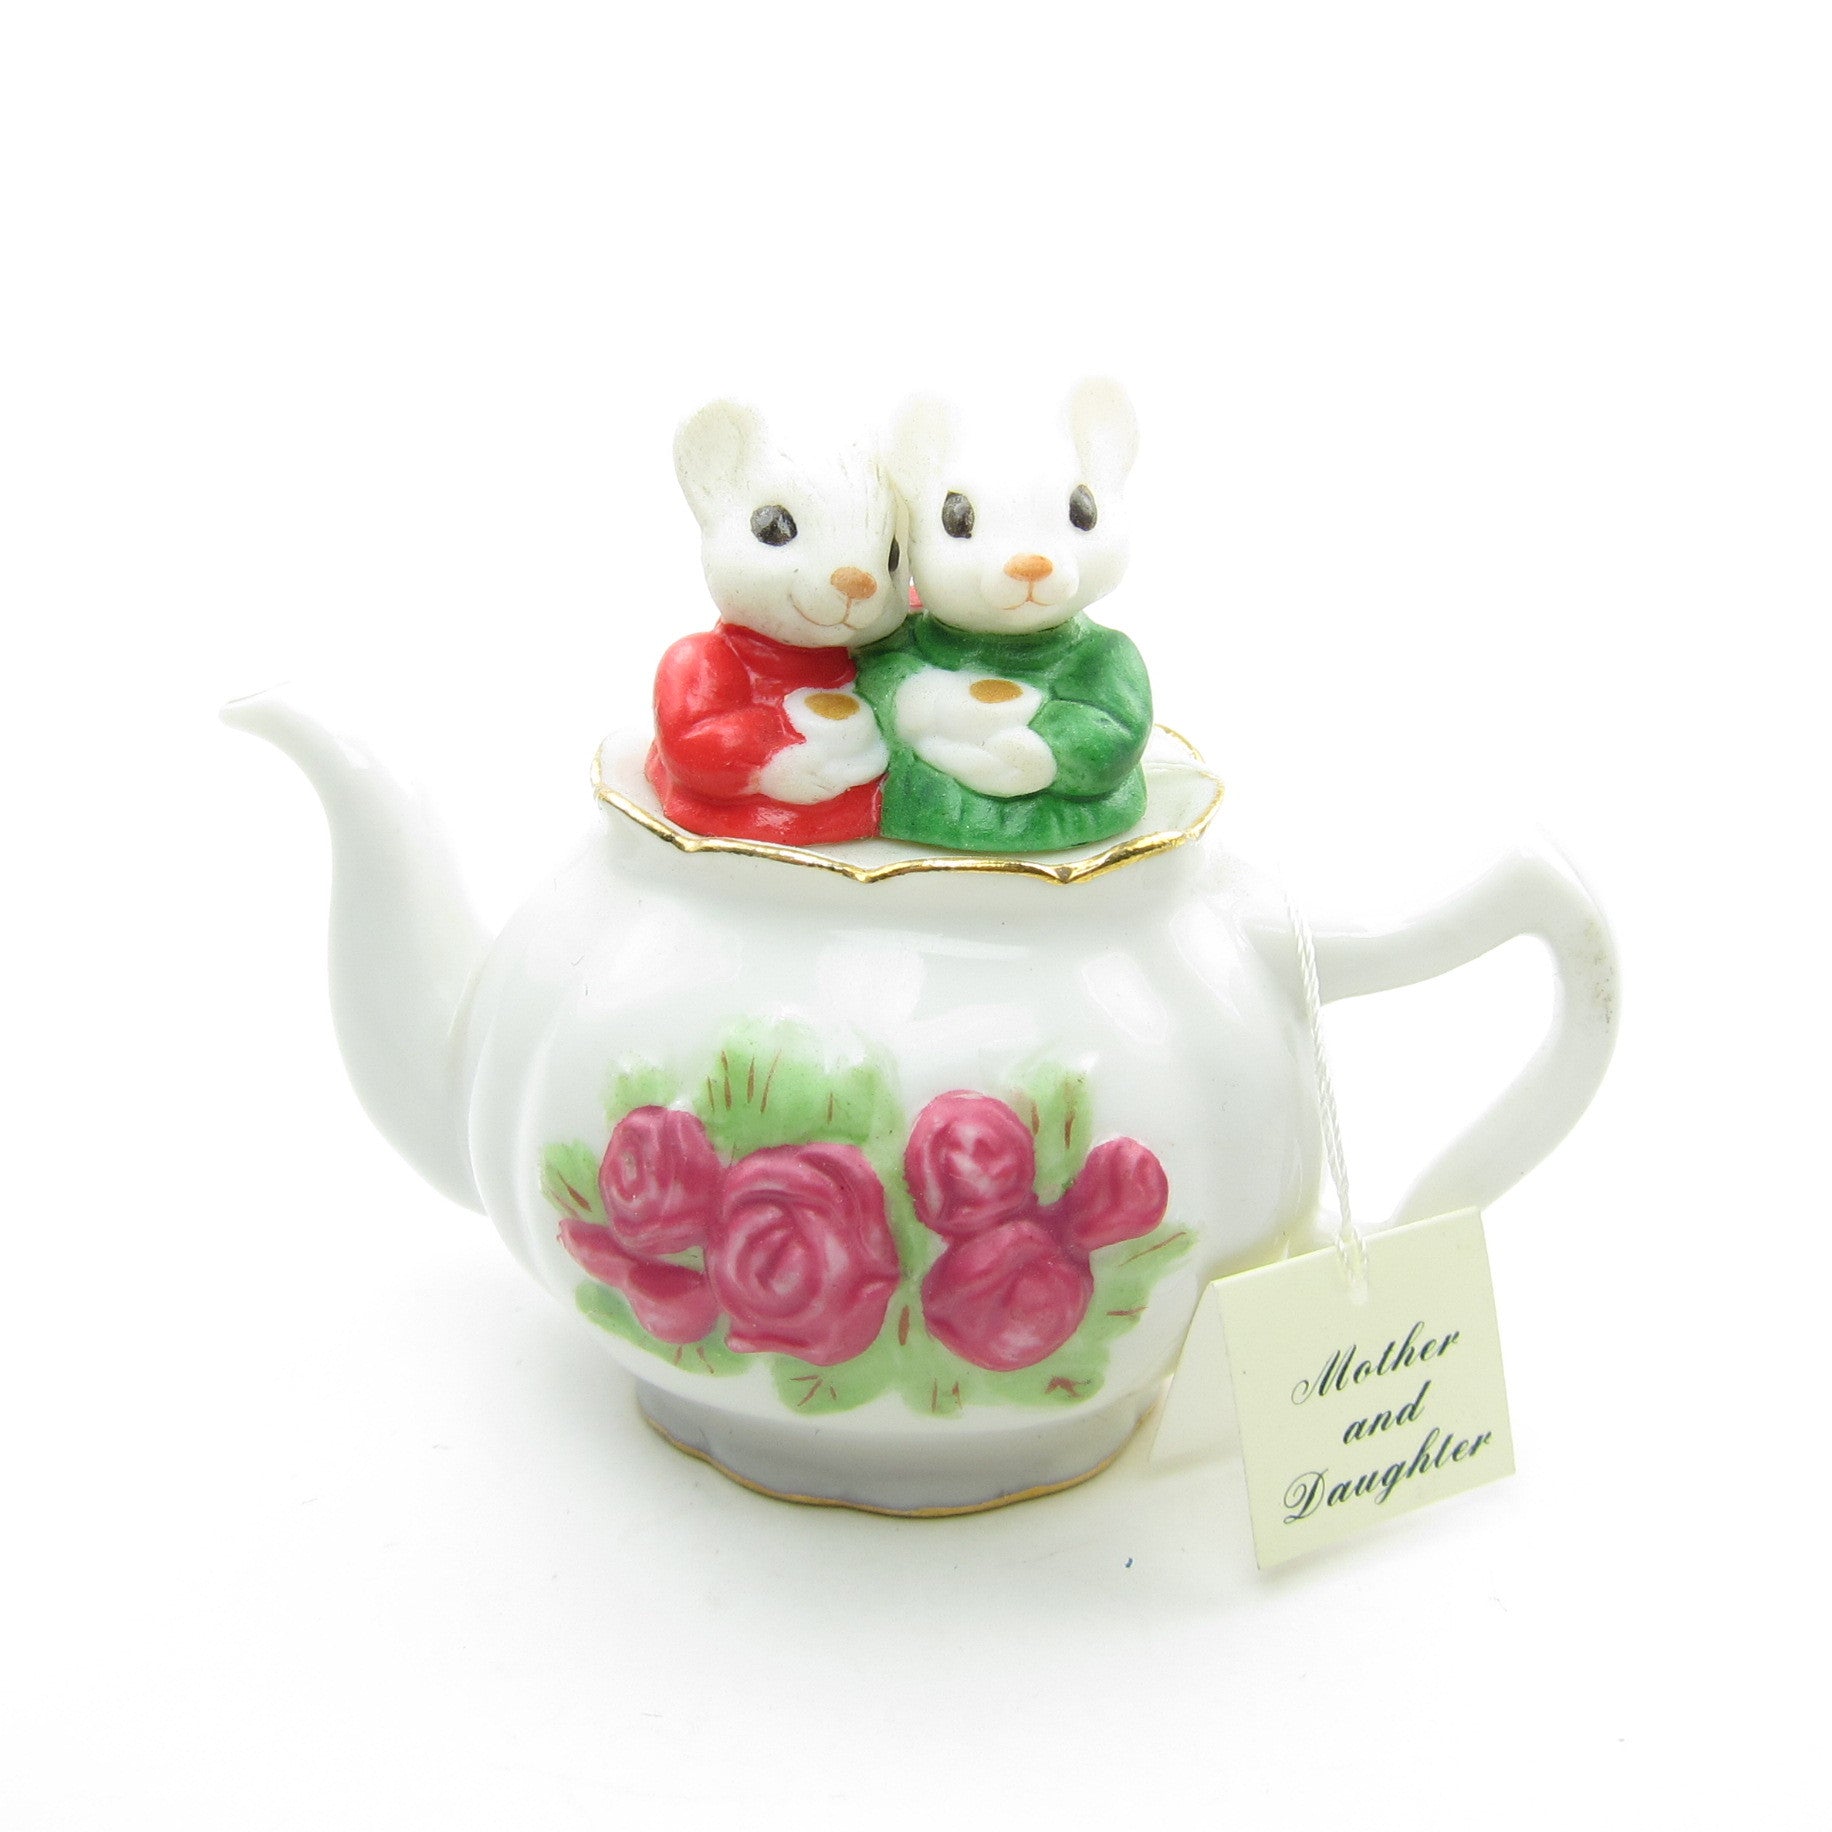 Mother and Daughter mice in tea pot Hallmark ornament